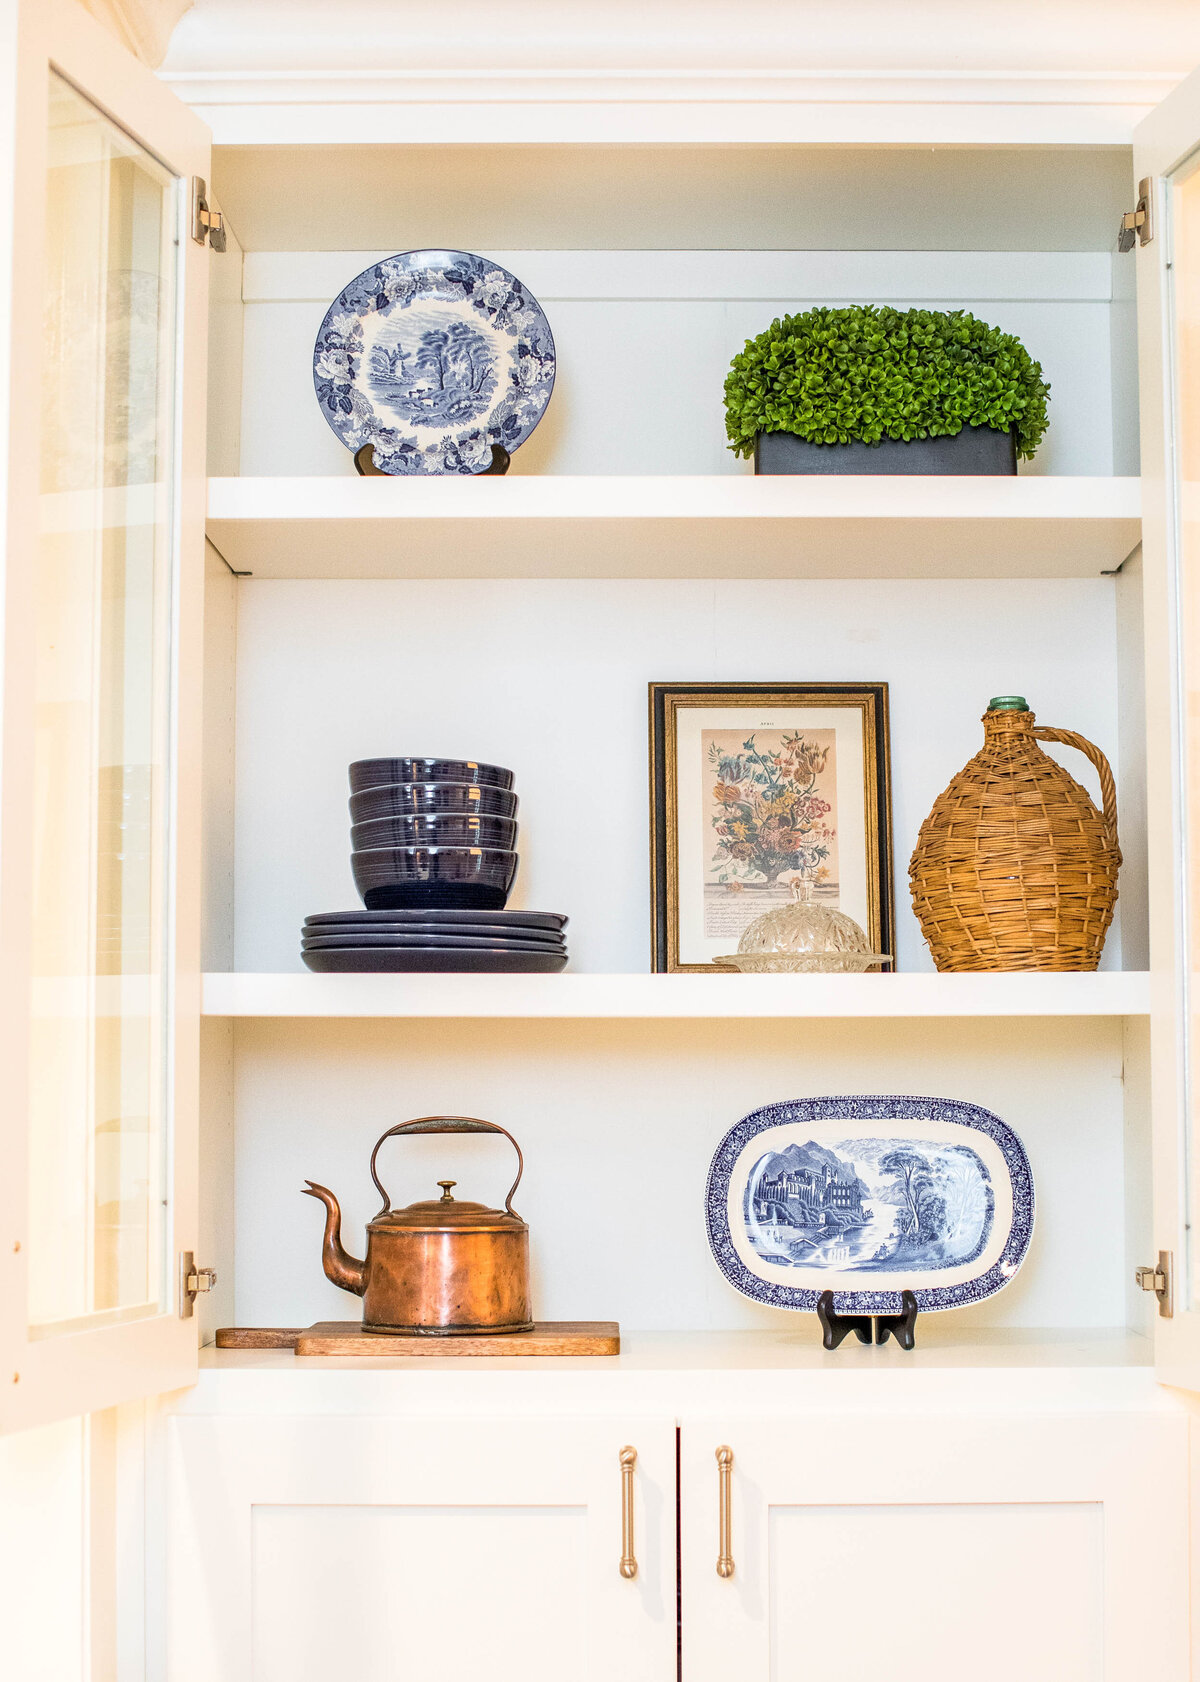 Shelf styling with classic style